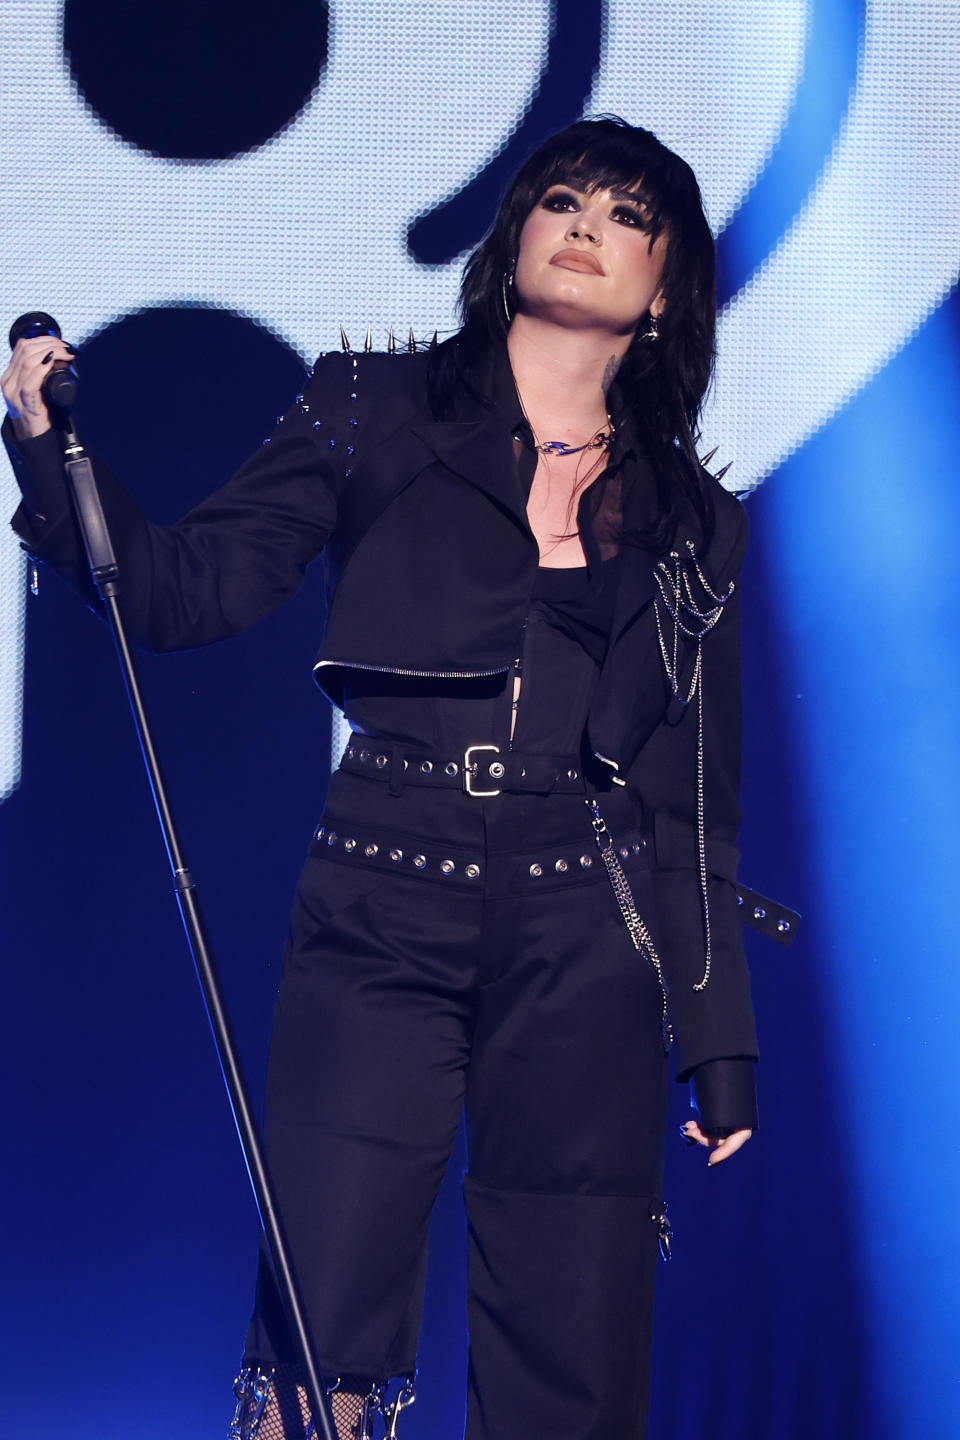 Close-up of Demi performing onstage